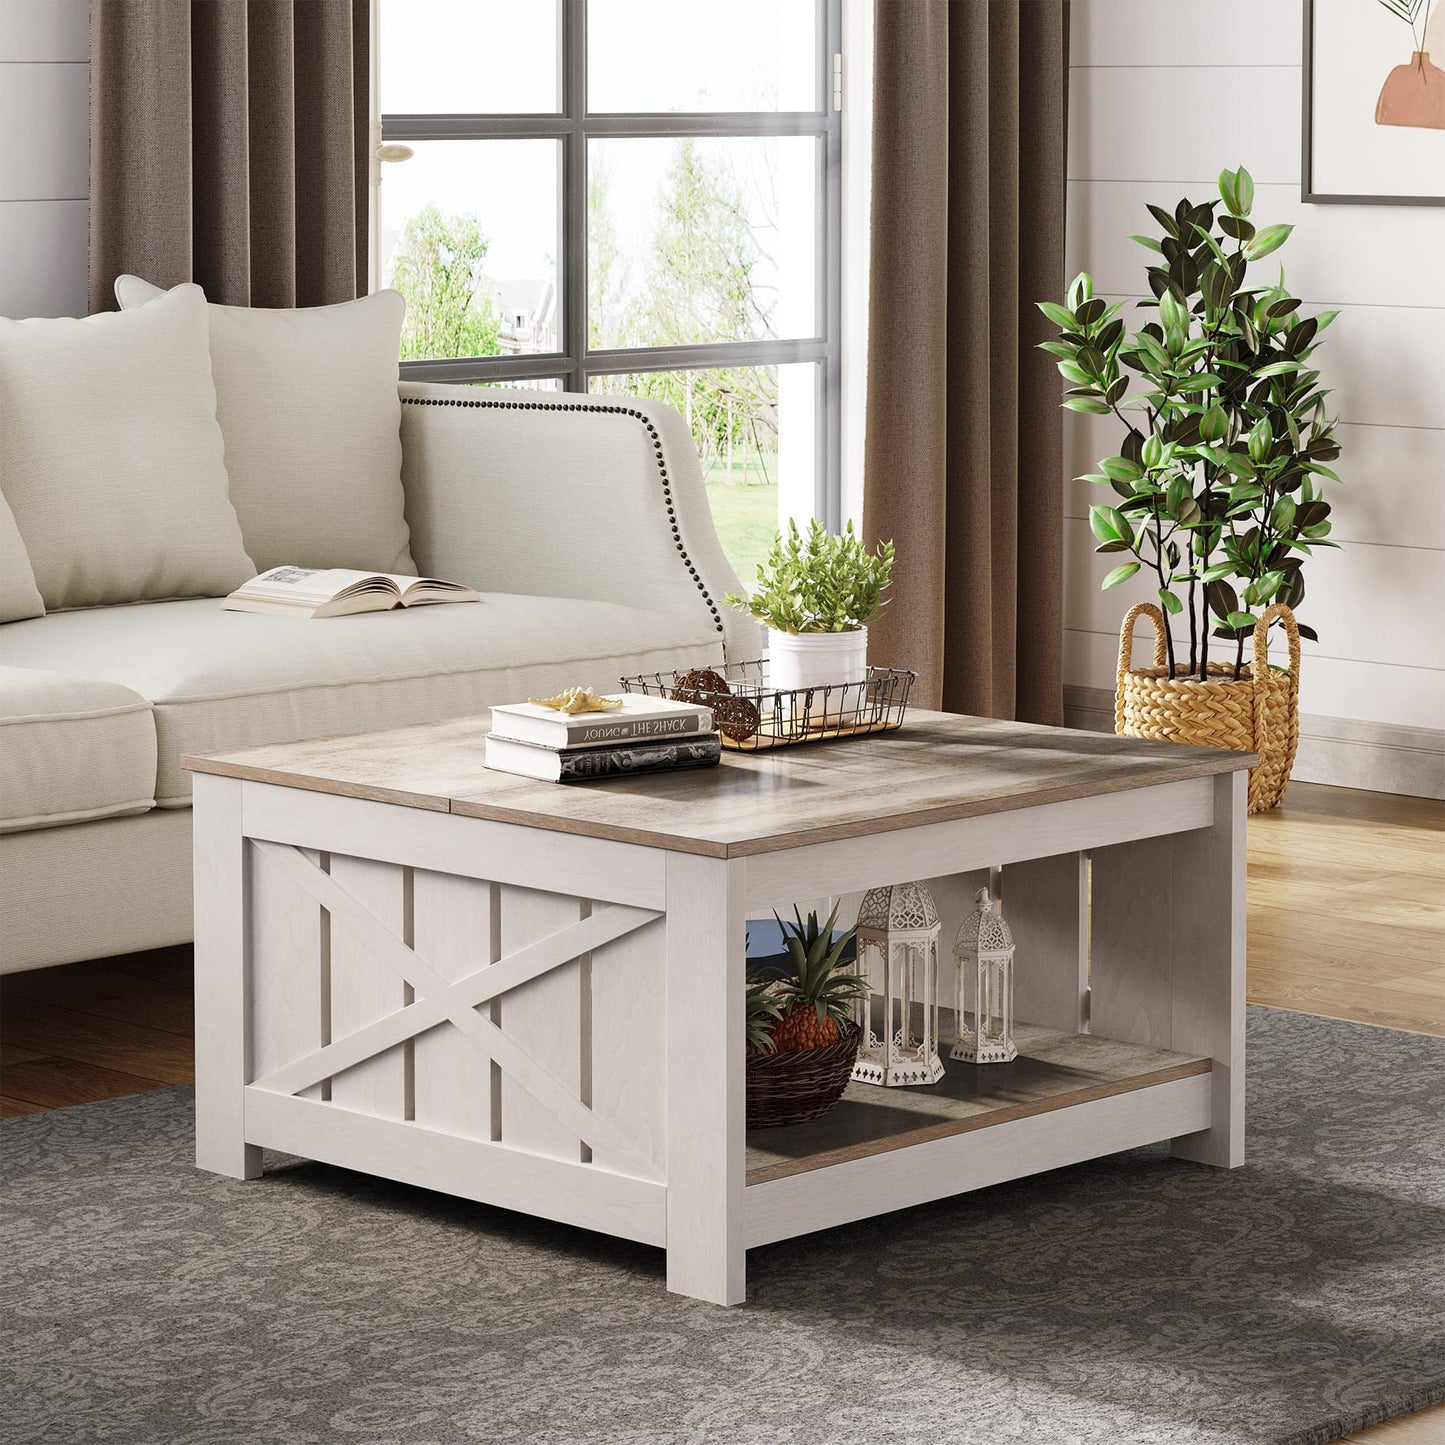 YITAHOME Coffee Table Farmhouse Coffee Table with Storage Rustic Wood Cocktail Table,Square Coffee Table for Living Meeting Room with Half Open Storage Compartment,Grey Wash